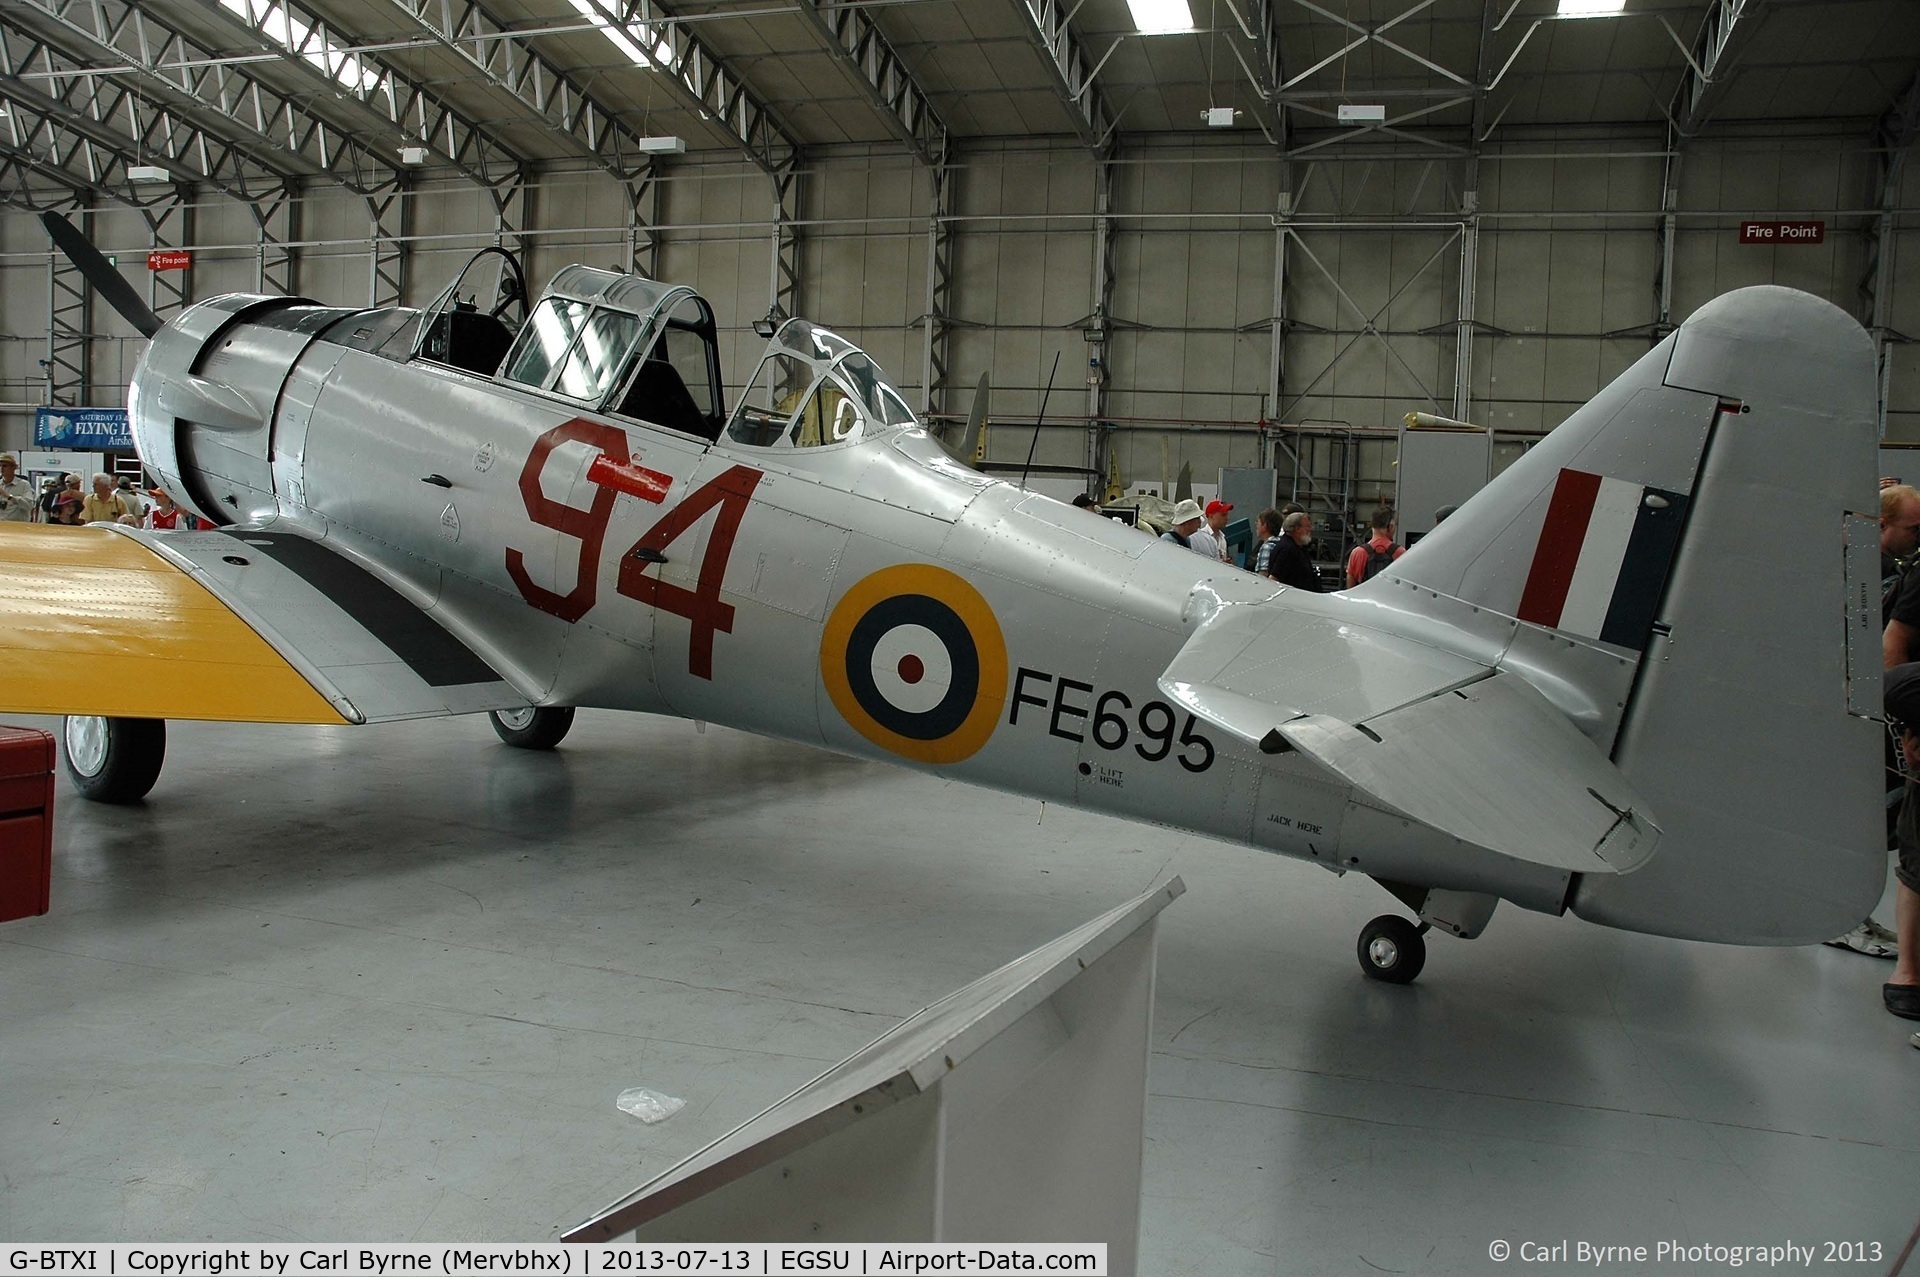 G-BTXI, 1942 Noorduyn AT-16 Harvard IIB C/N 14-429, Part of the Imperial War Museum's preserved flying collection.